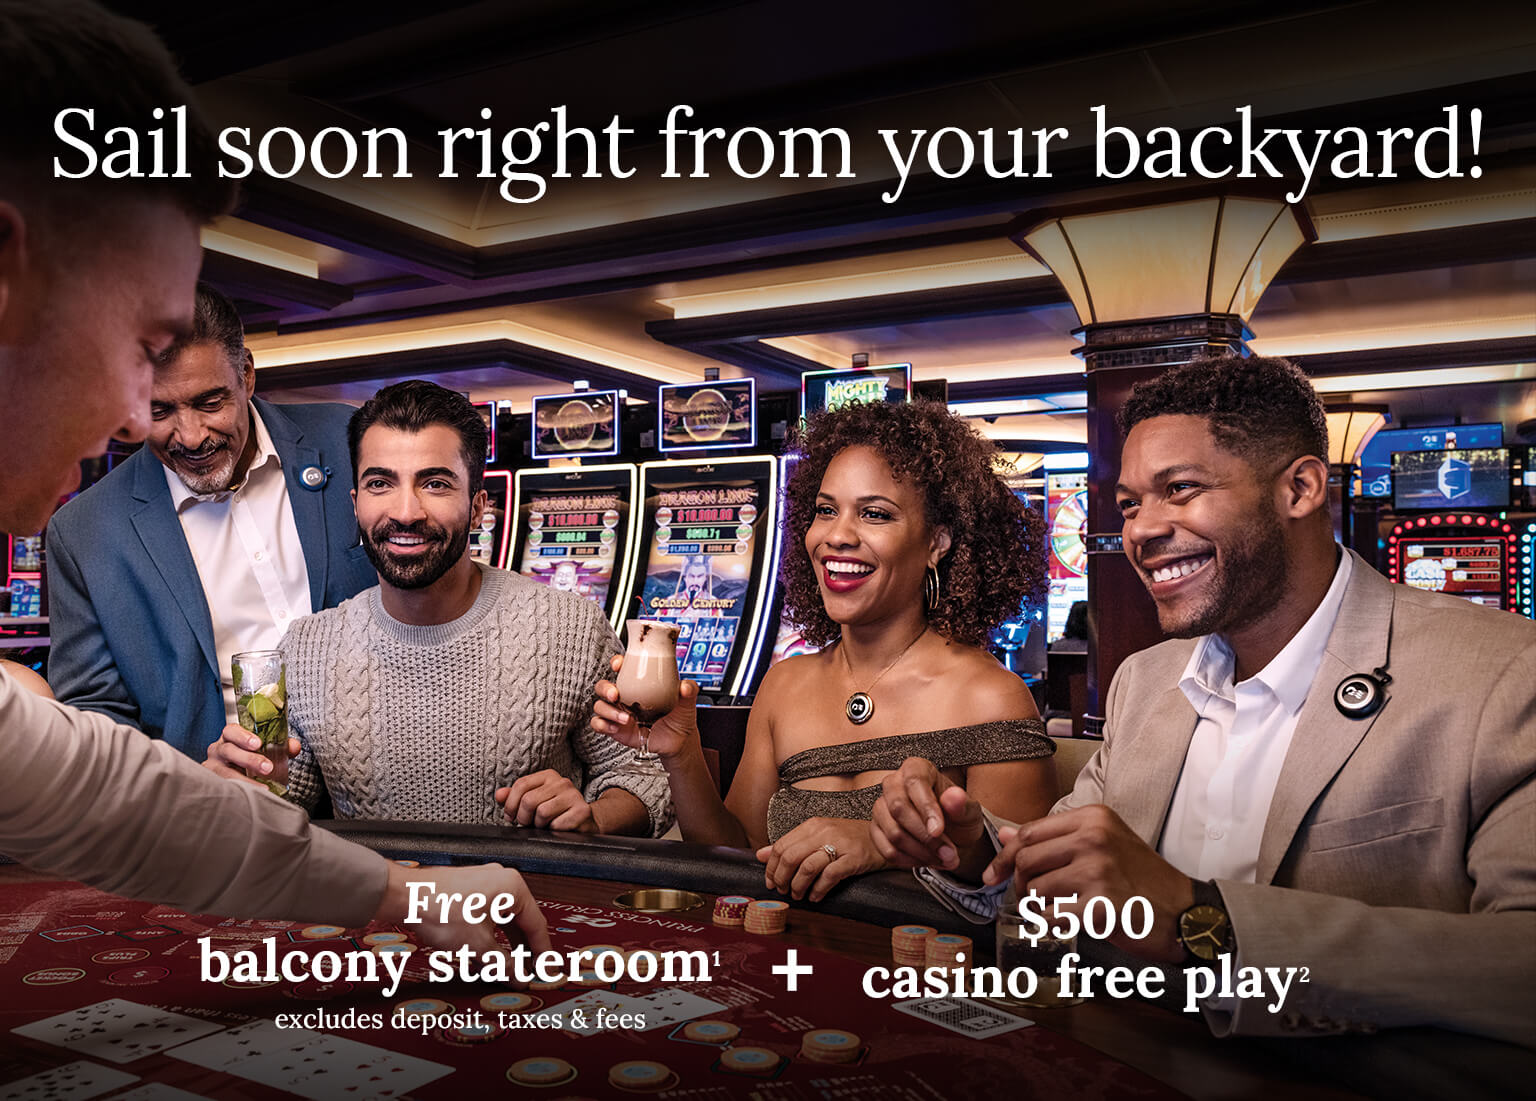 Enjoy a free balcony stateroom + $500 casino free play. Click here to book.